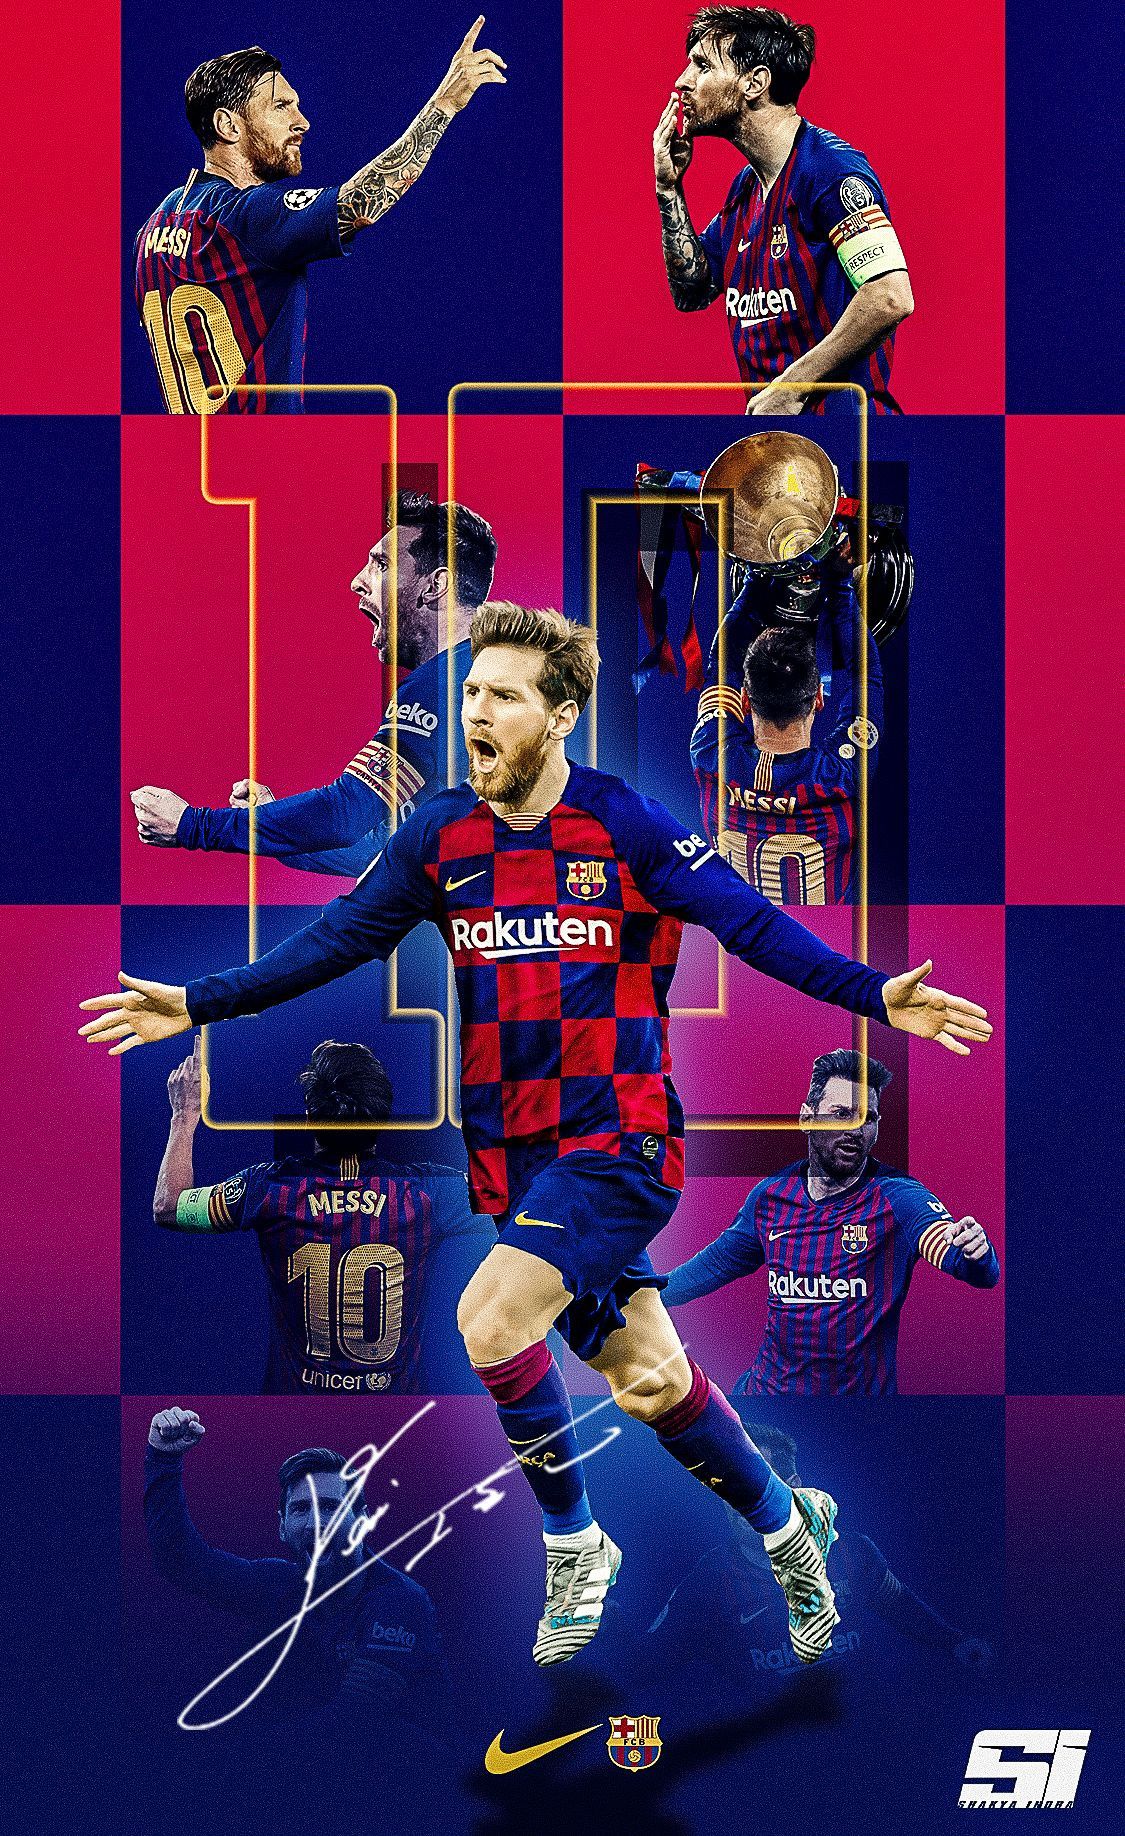 Lionel Messi Goat 2020 Wallpapers - Wallpaper Cave